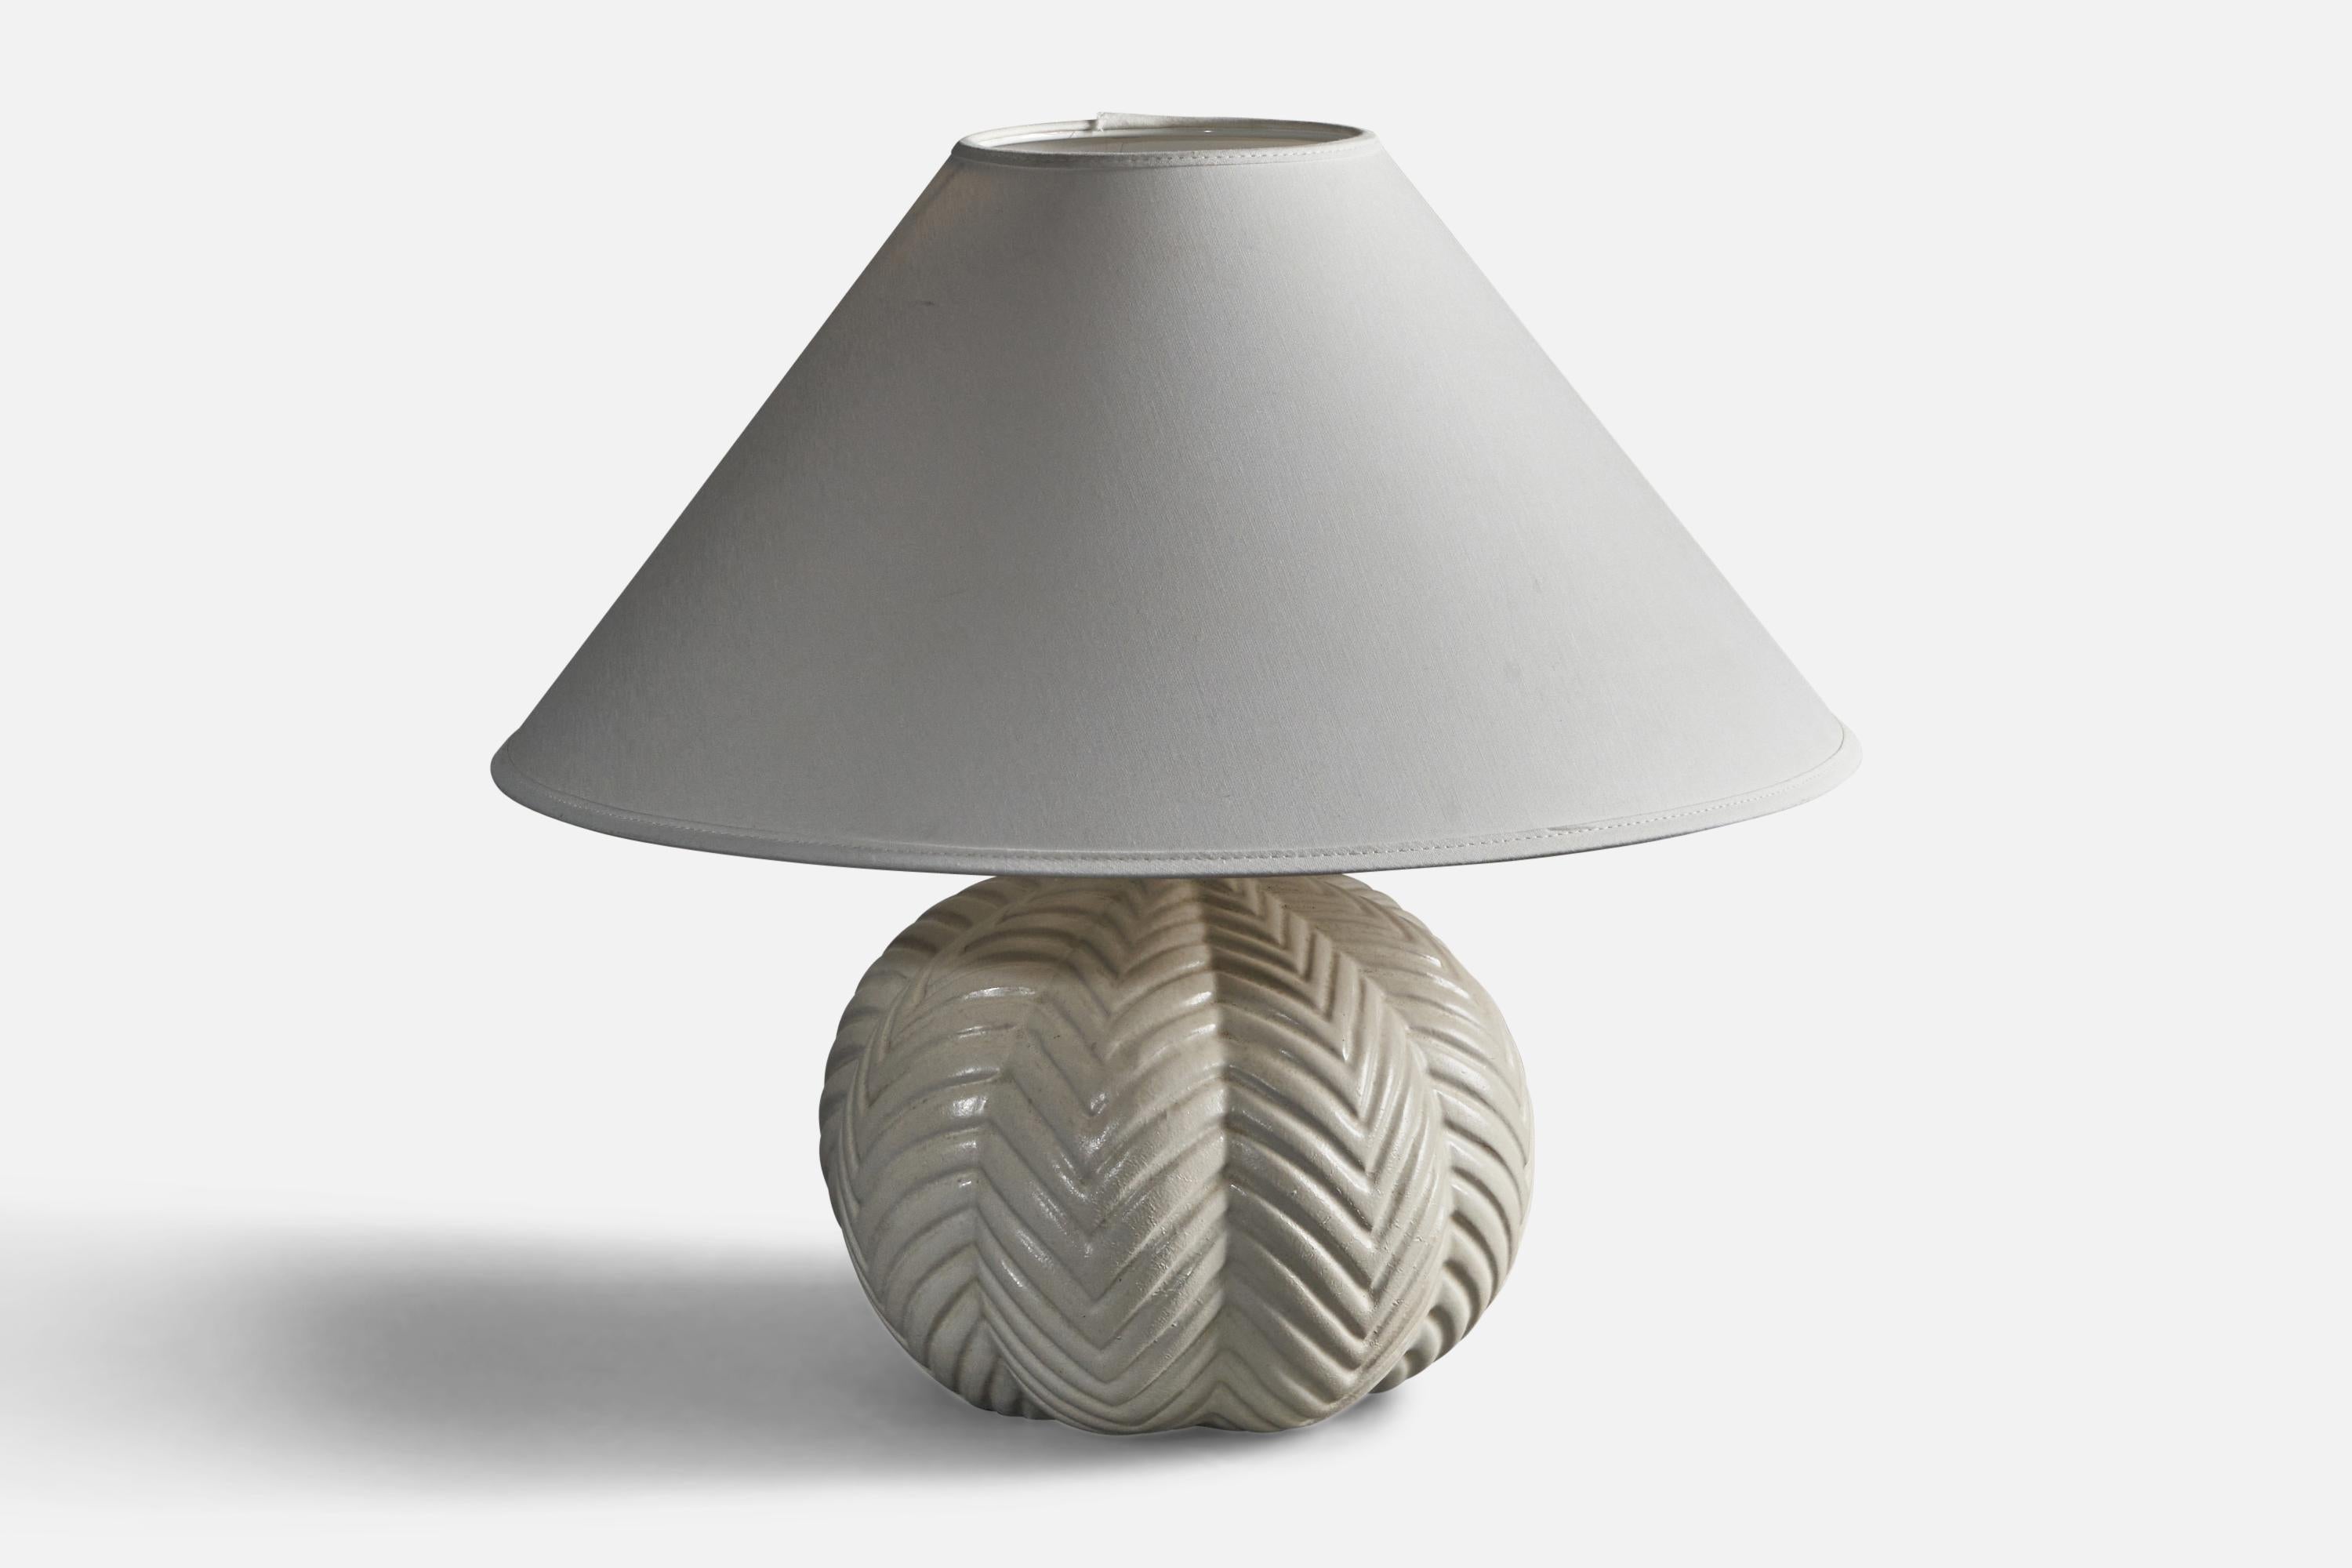 An incised off-white glazed stoneware table lamp, designed by Marianne Starck and produced by Michael Andersen, Bornholm, Denmark, 1960s.

Dimensions of Lamp (inches): 10” H x 9” Diameter

Dimensions of Shade (inches): 4.75” Top Diameter x 16”